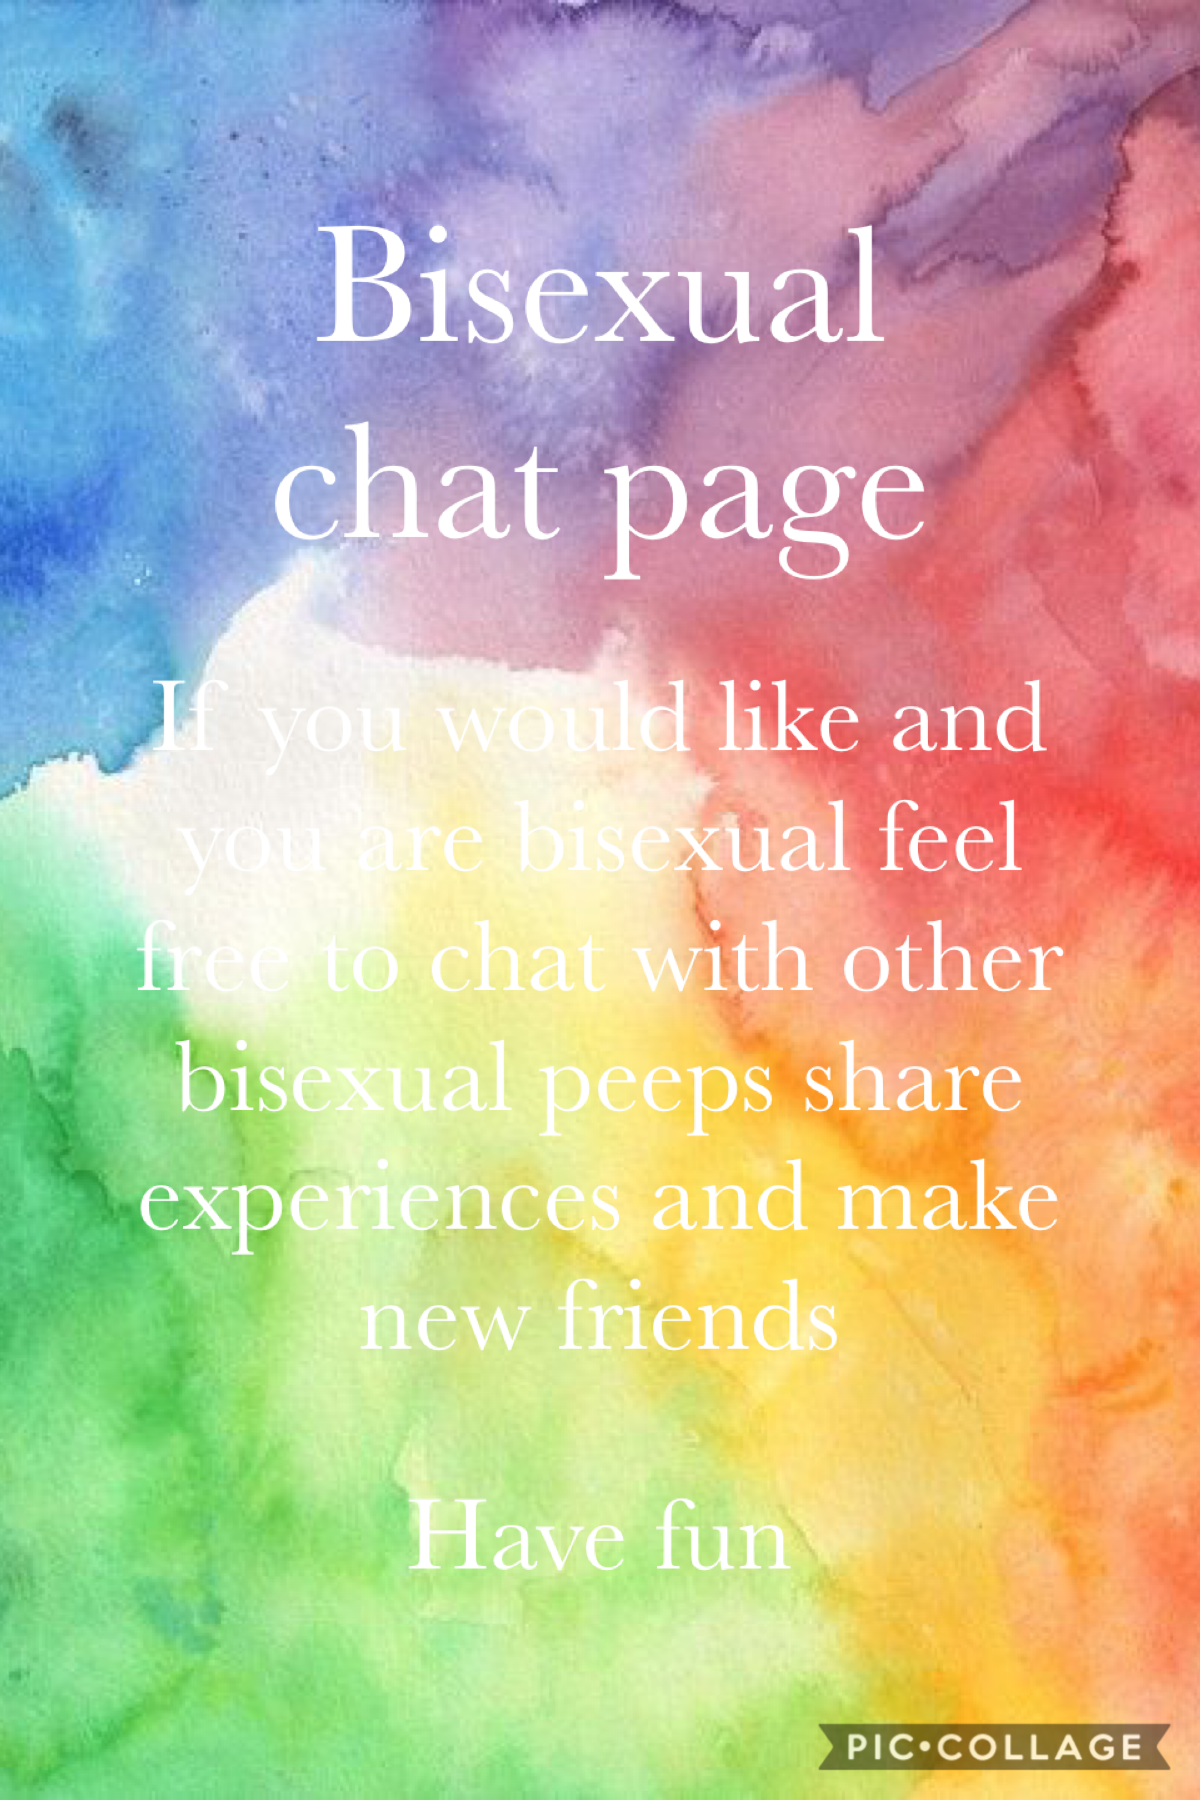 Bisexual chatpage 